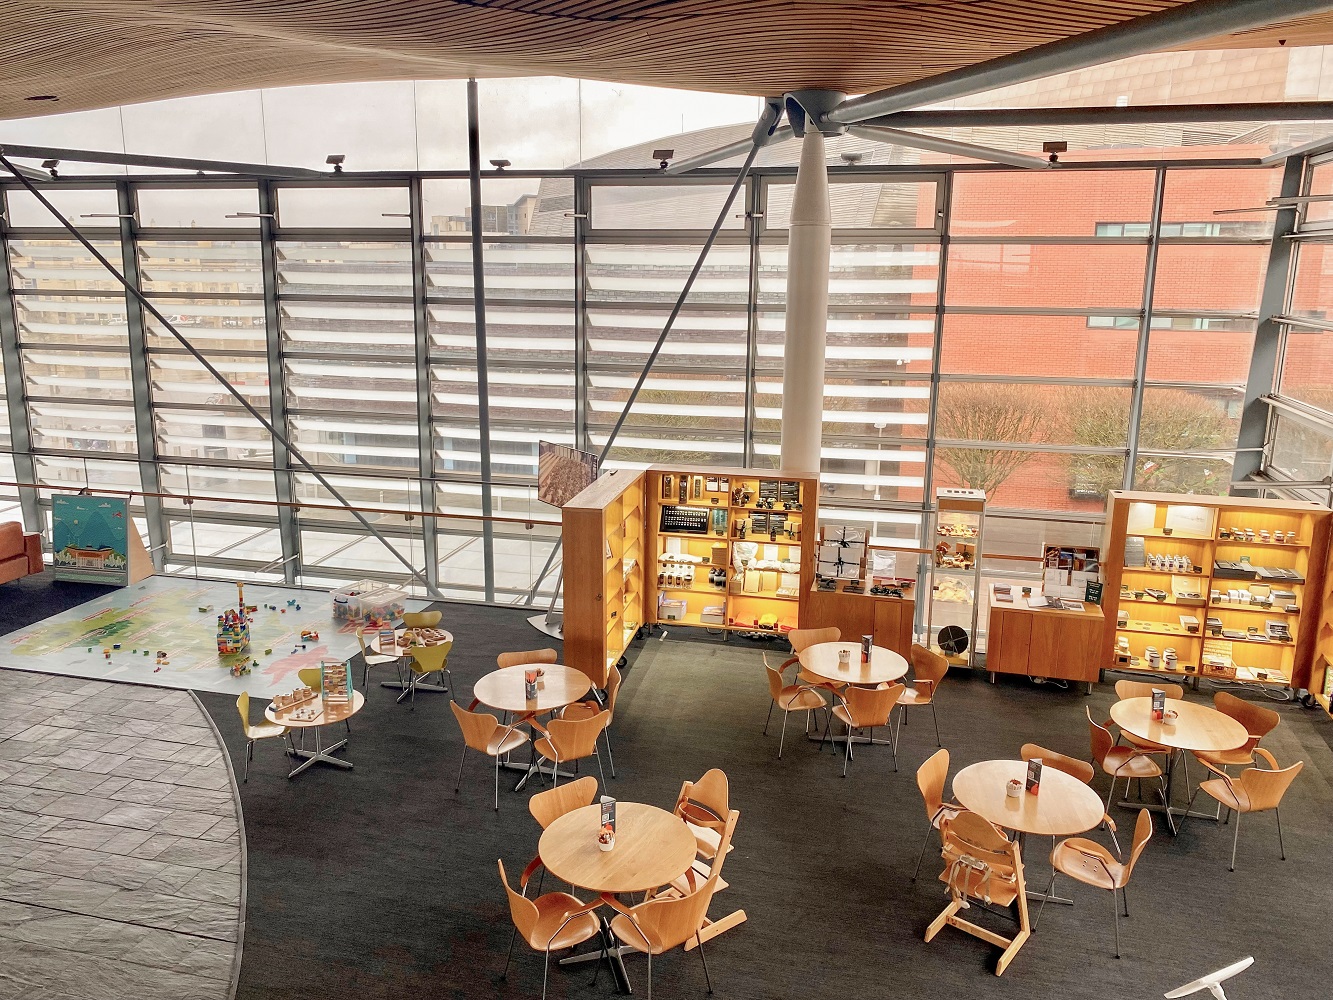 An image of the Senedd Café from above. On the left hand side is a children's playmat and play area with toys.